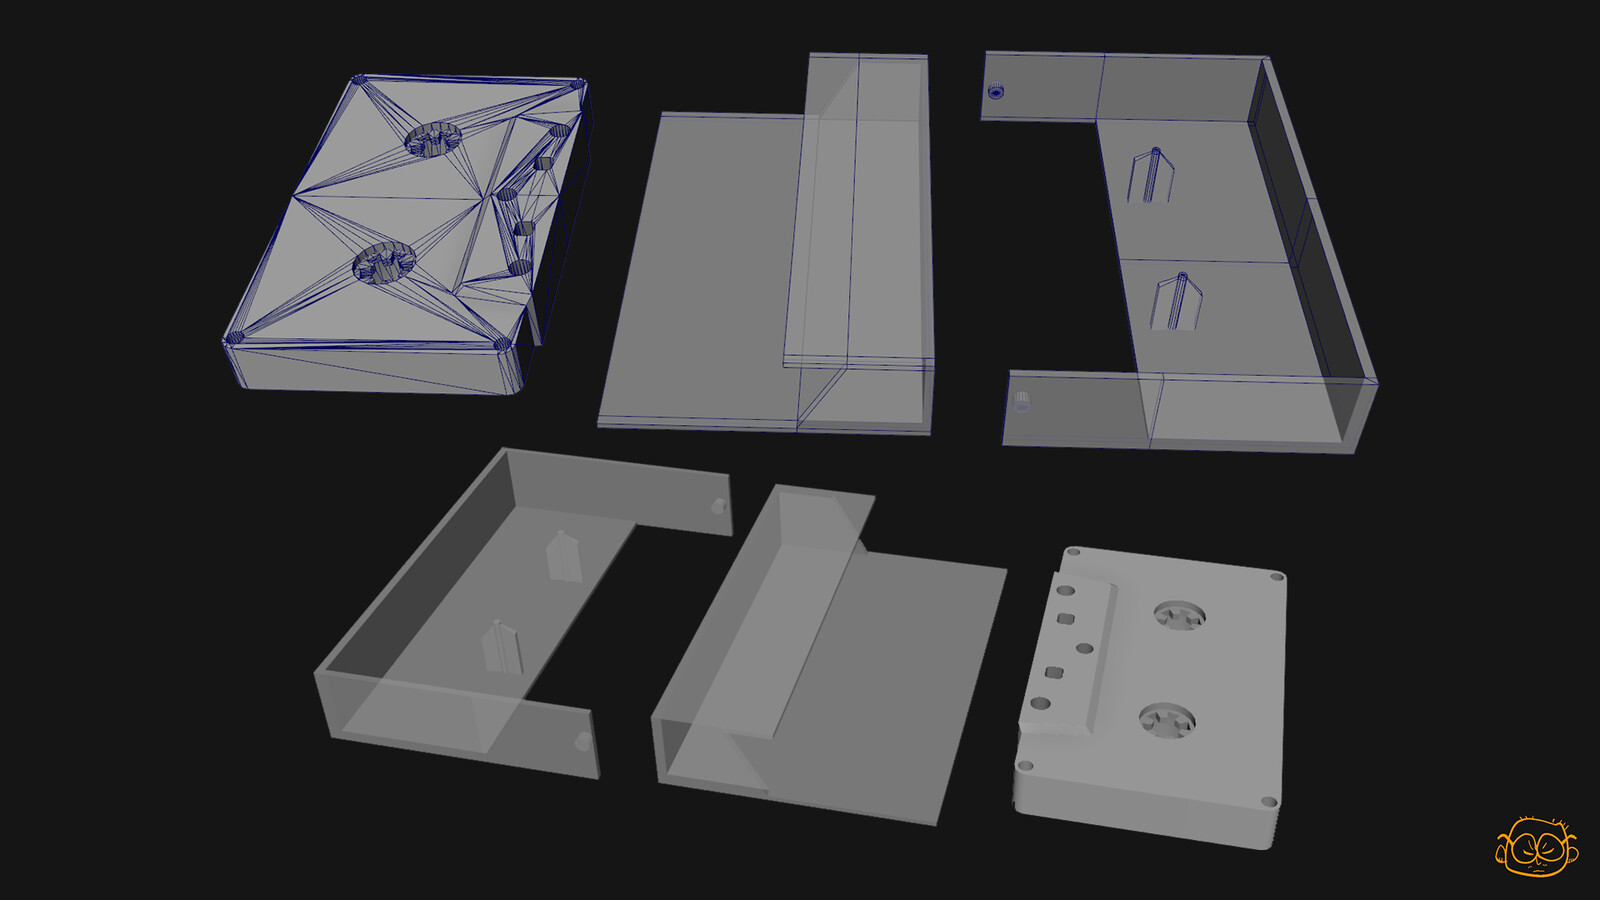 Lowpoly mesh of the casette and jewel case. I want the round shapes to be clear even while close to the camera, hence the fairly high polycount. 